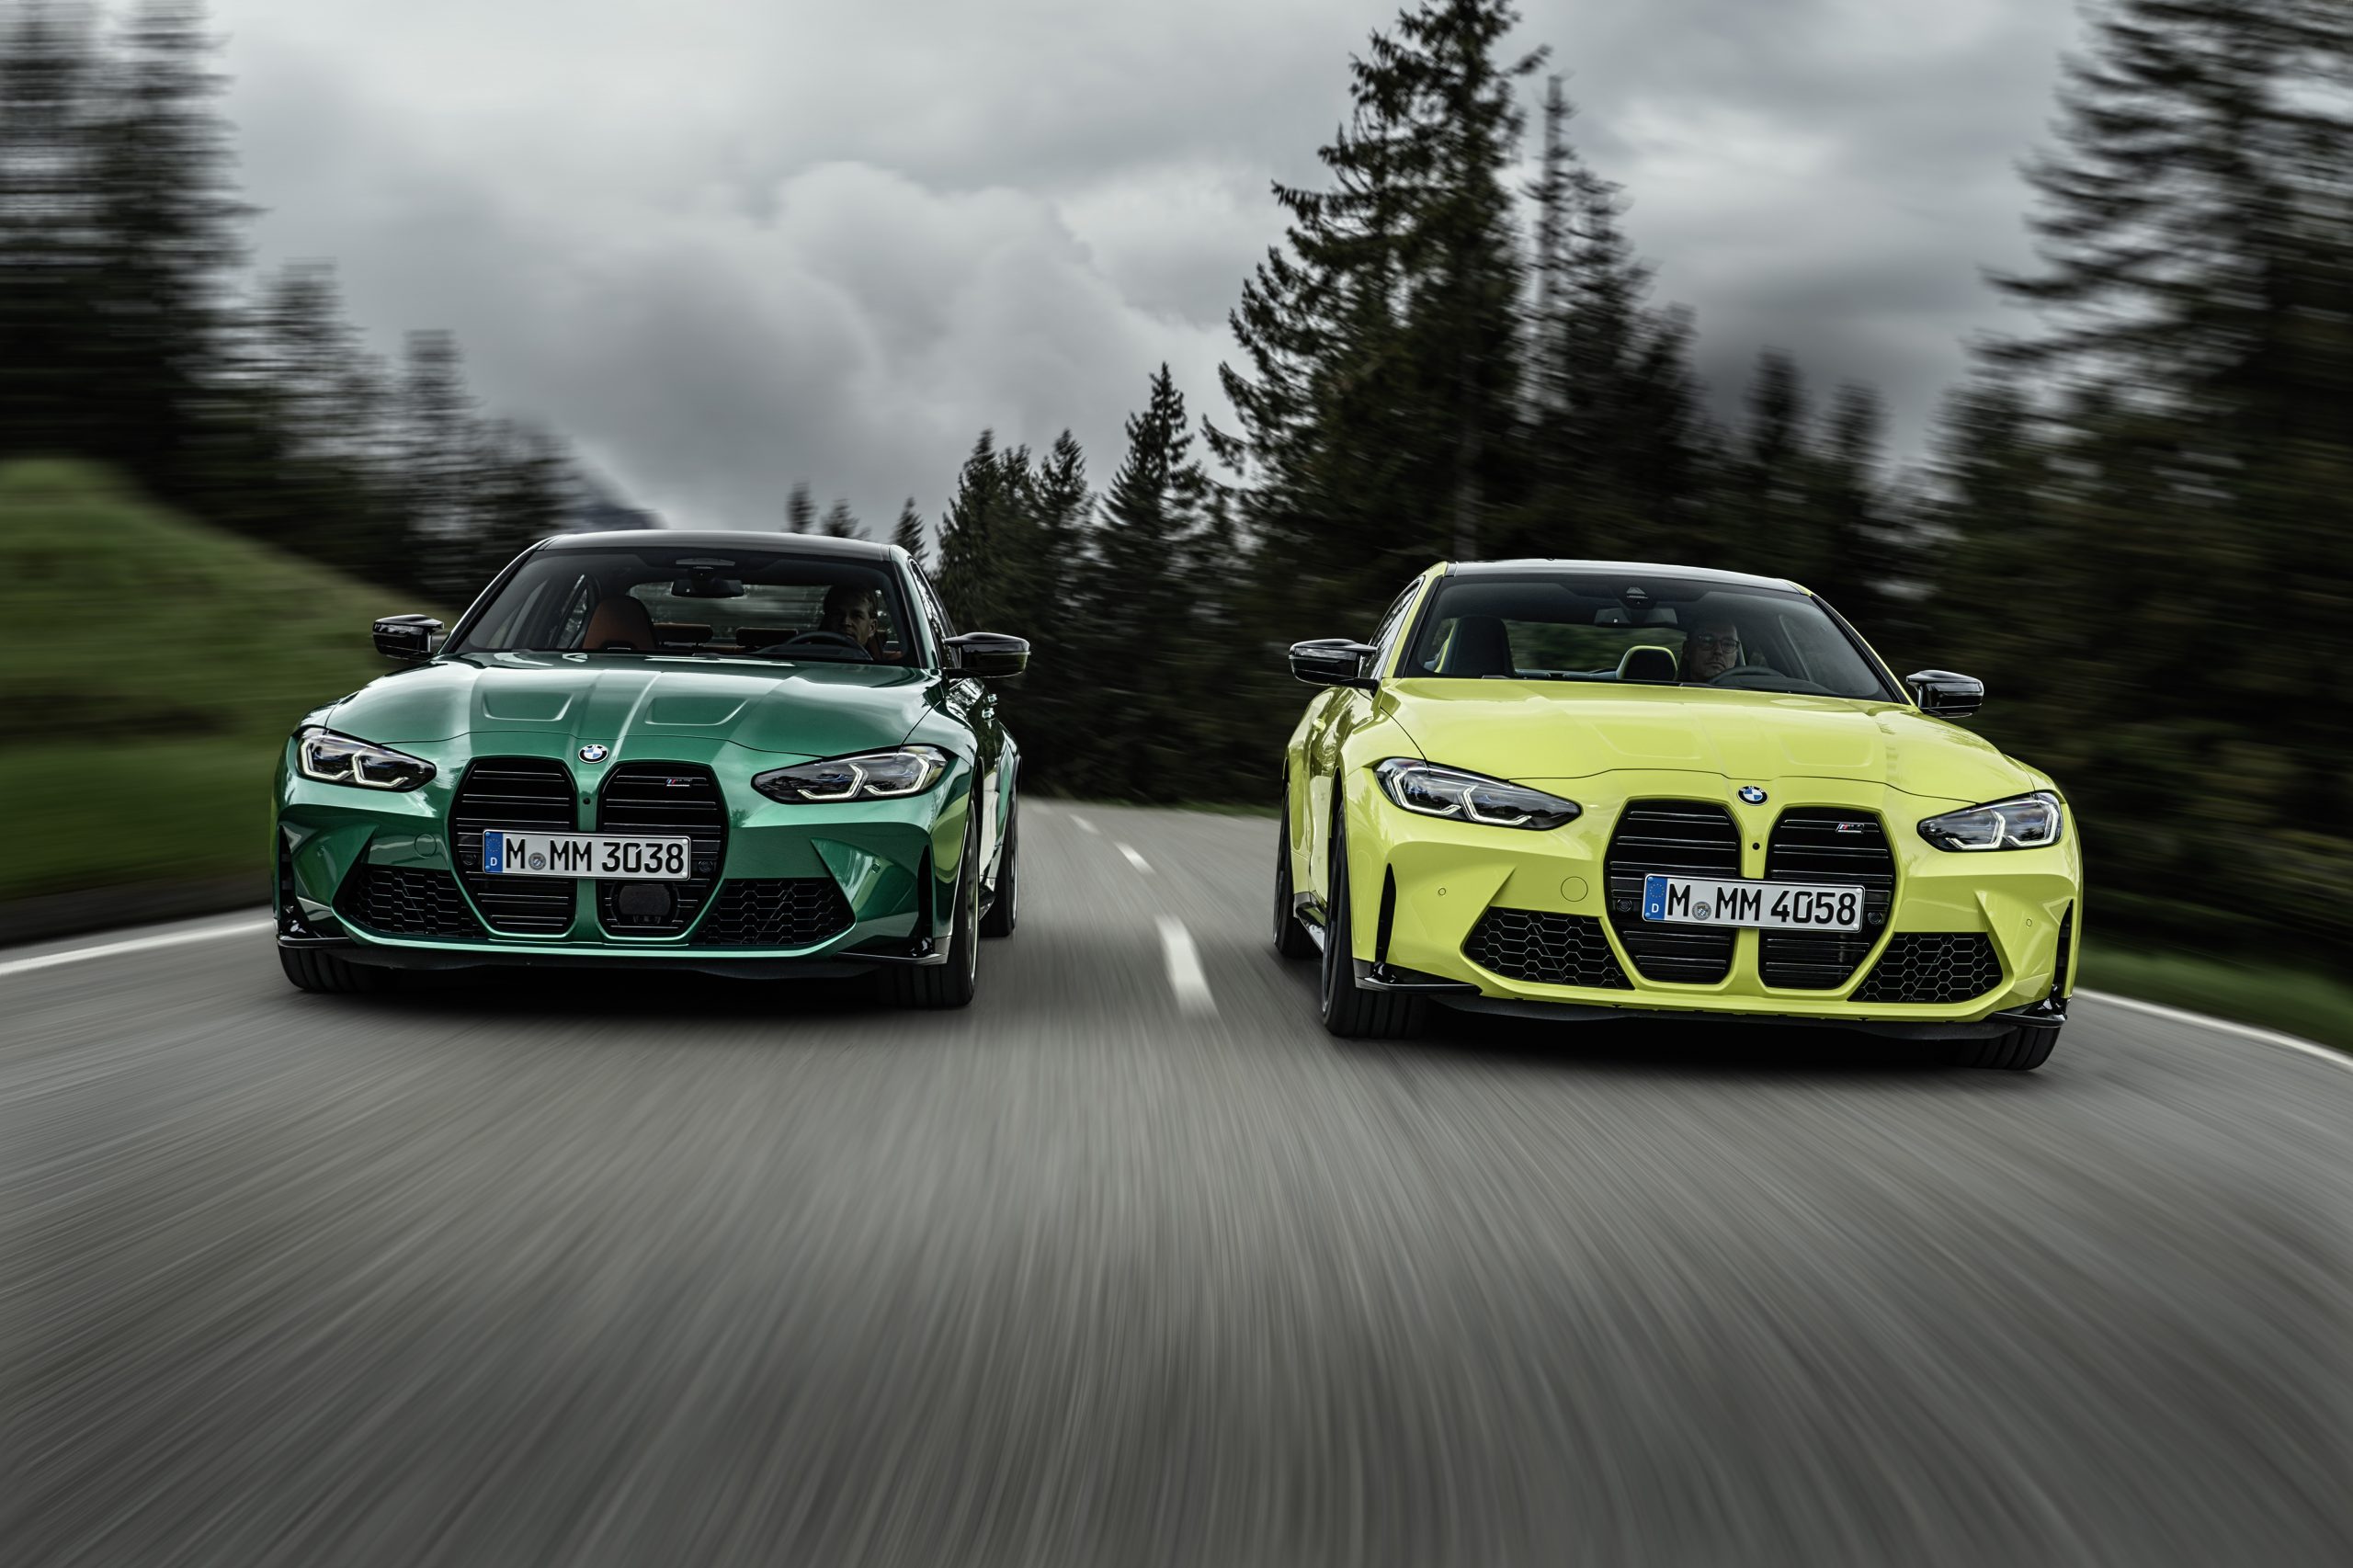 An Isle of Man Green BMW M3 side by side with a Sao Paulo Yellow BMW M4 represent two of the best paint colors of 2022